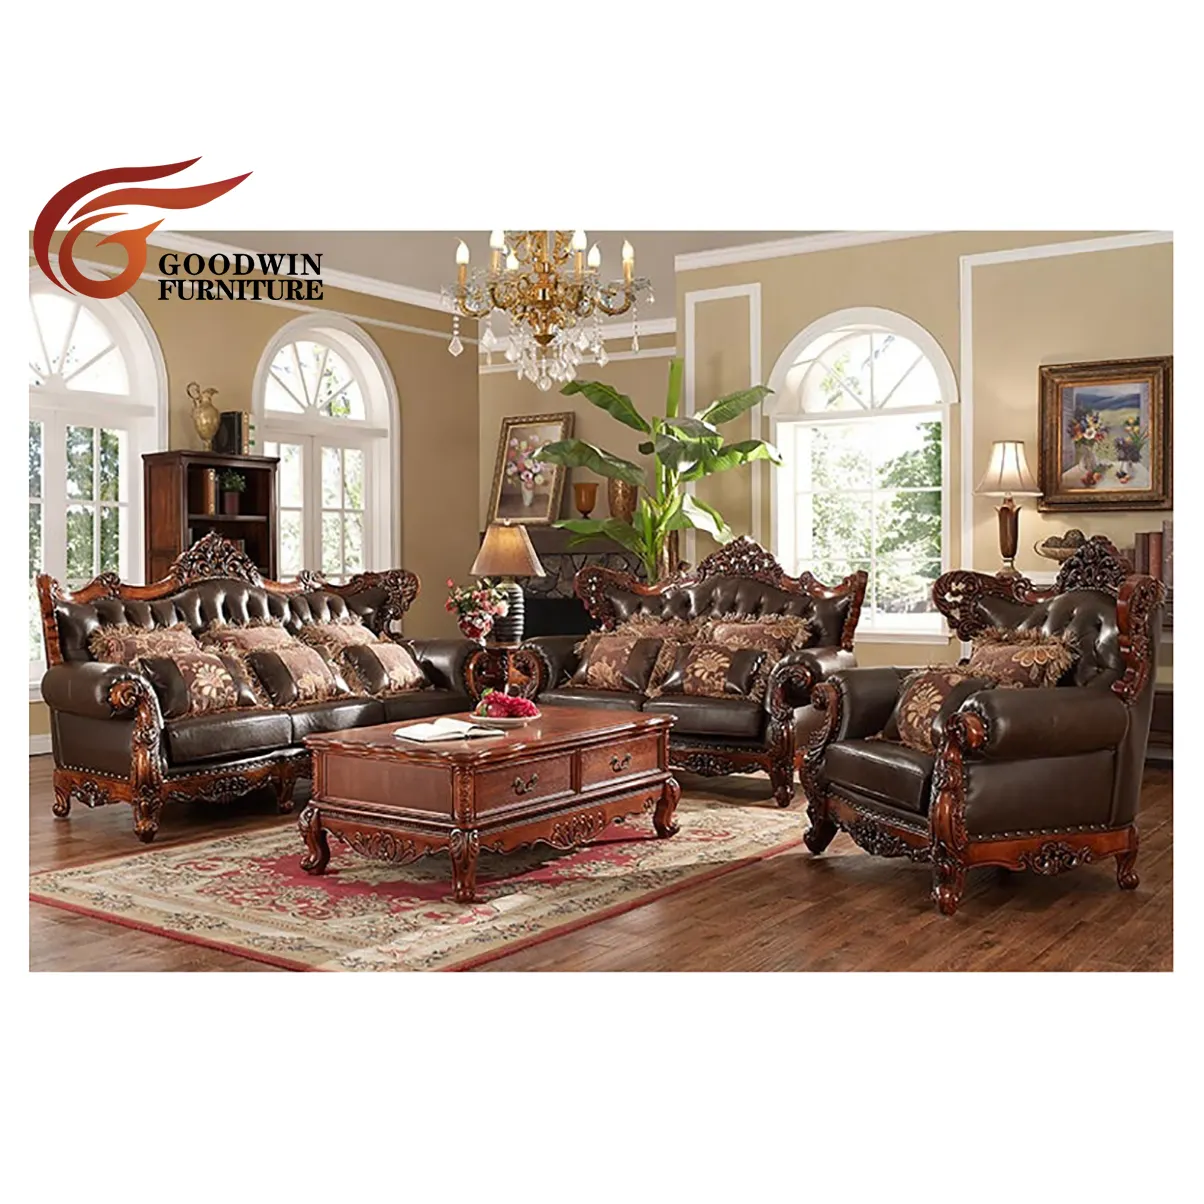 Goodwin Classic Style Solid Wood Living Room Furniture Living Room Sofas WA767